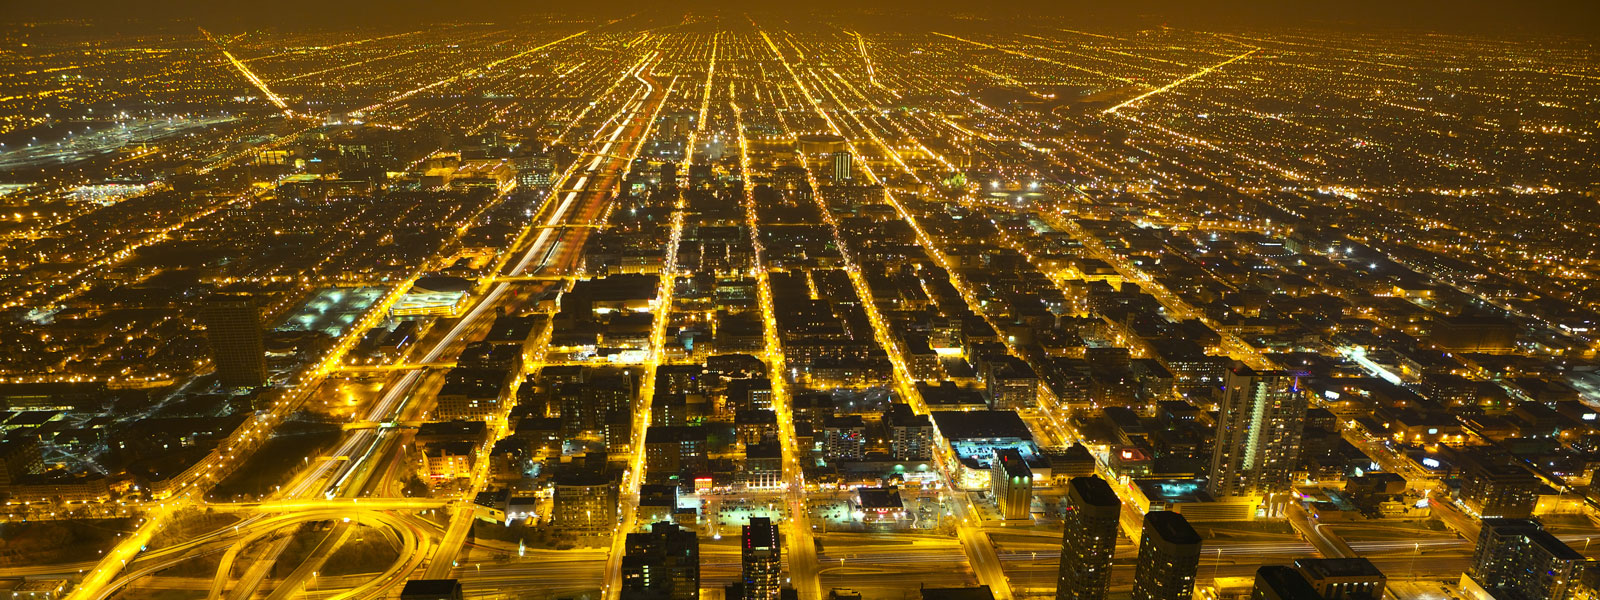 a birds eye view of a large city lit up with lights at night